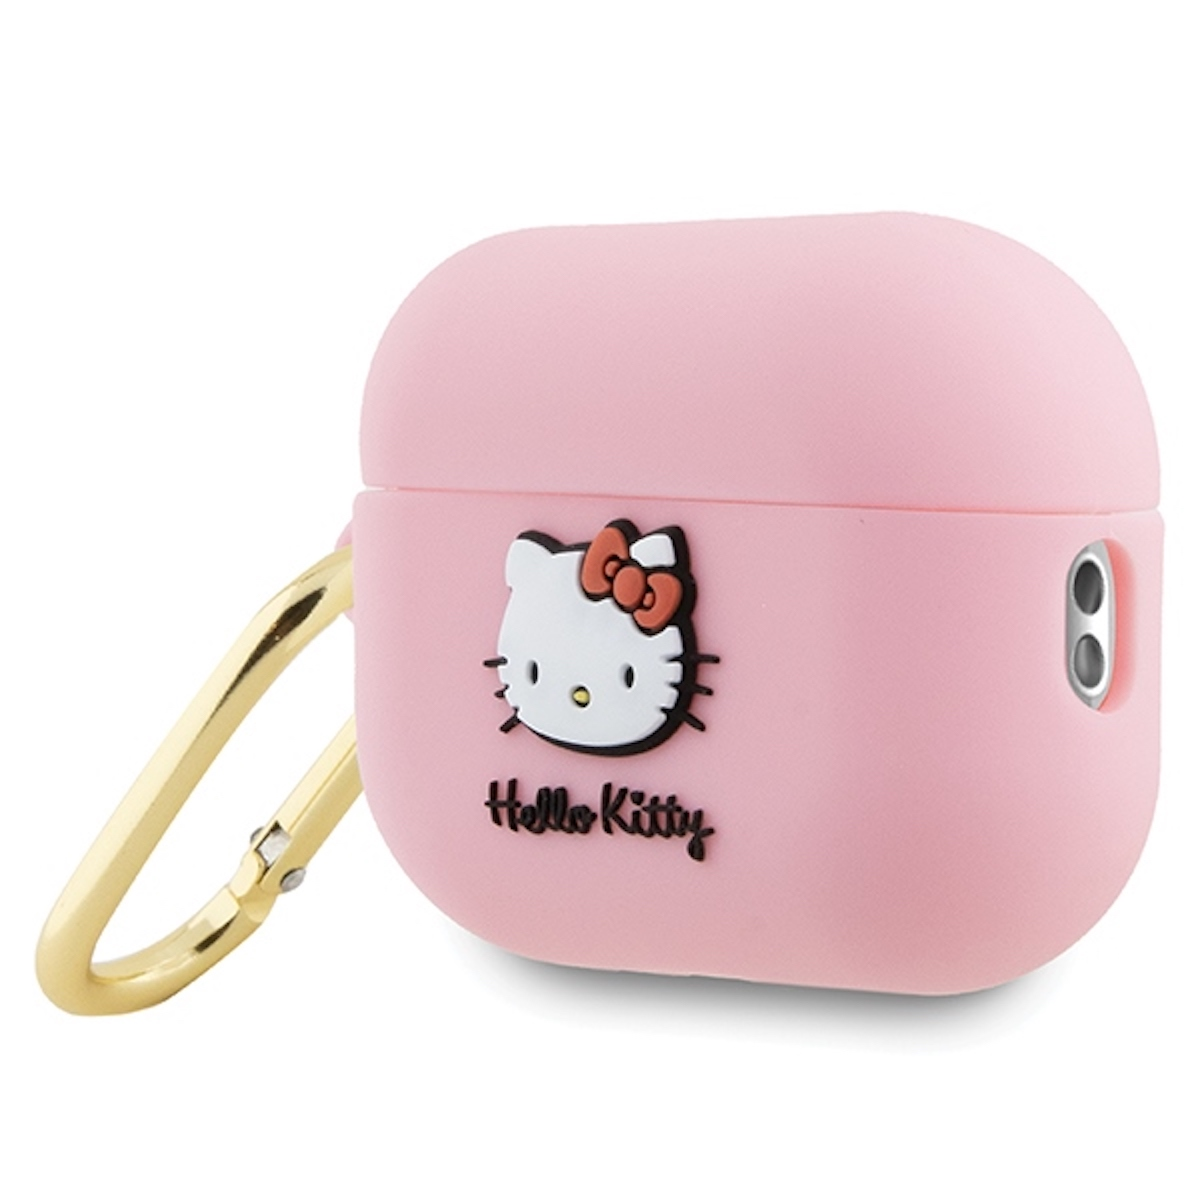 HELLO KITTY 2. Head BY Tasche Kitty Generation, Full Silikon 3D AirPods Schutzhülle, Pro Cover, AirPods Apple, Hülle CHEFMADE Rosa